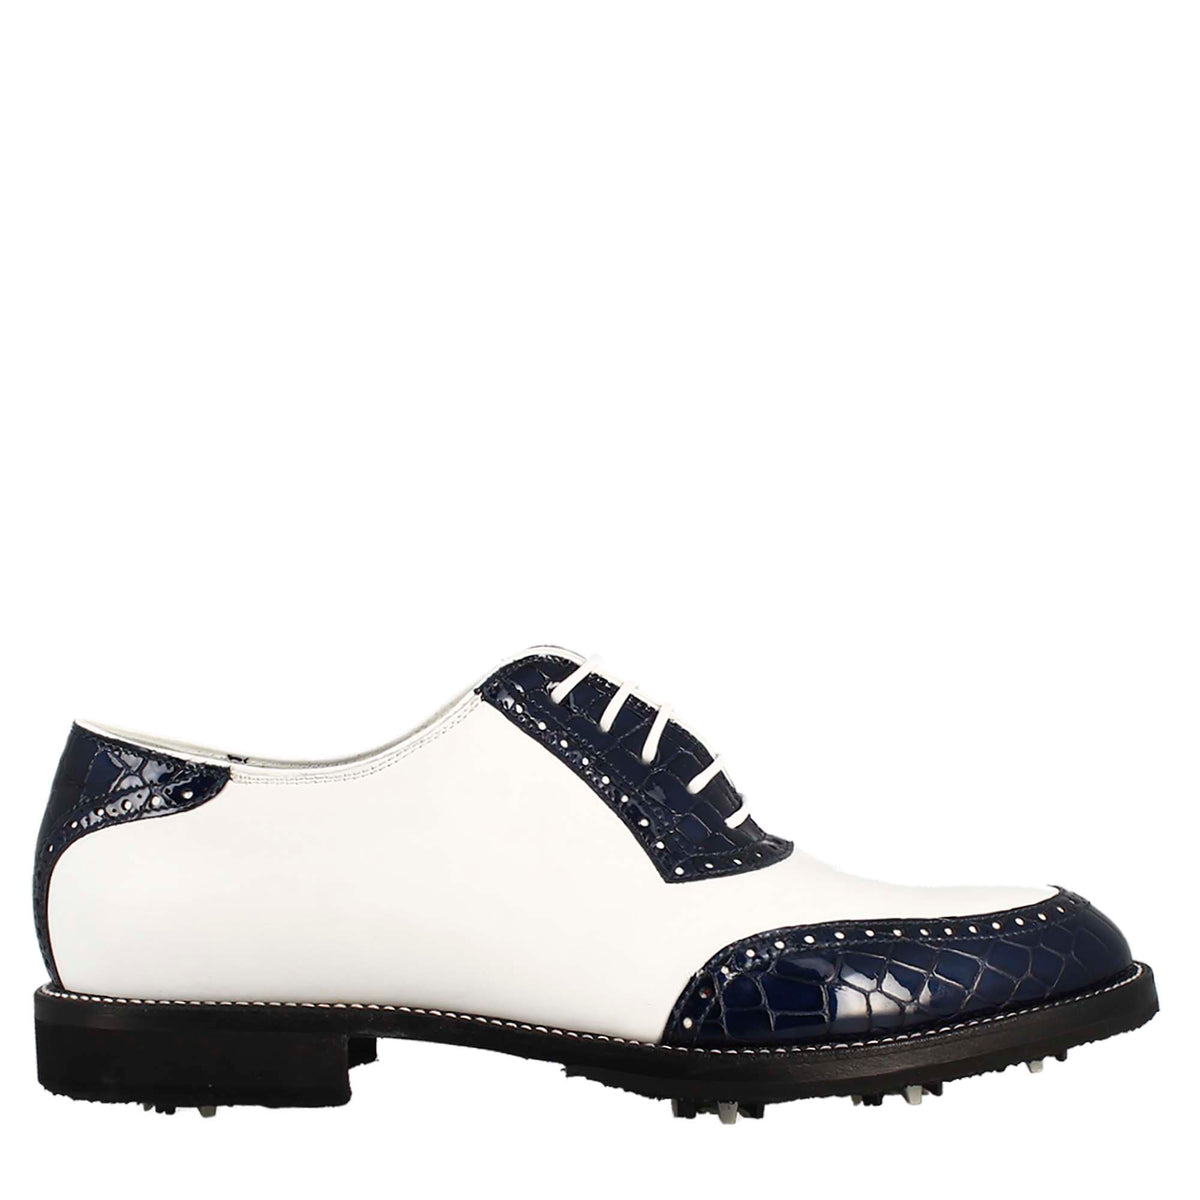 Handcrafted women's golf shoes in white leather and blue coconut